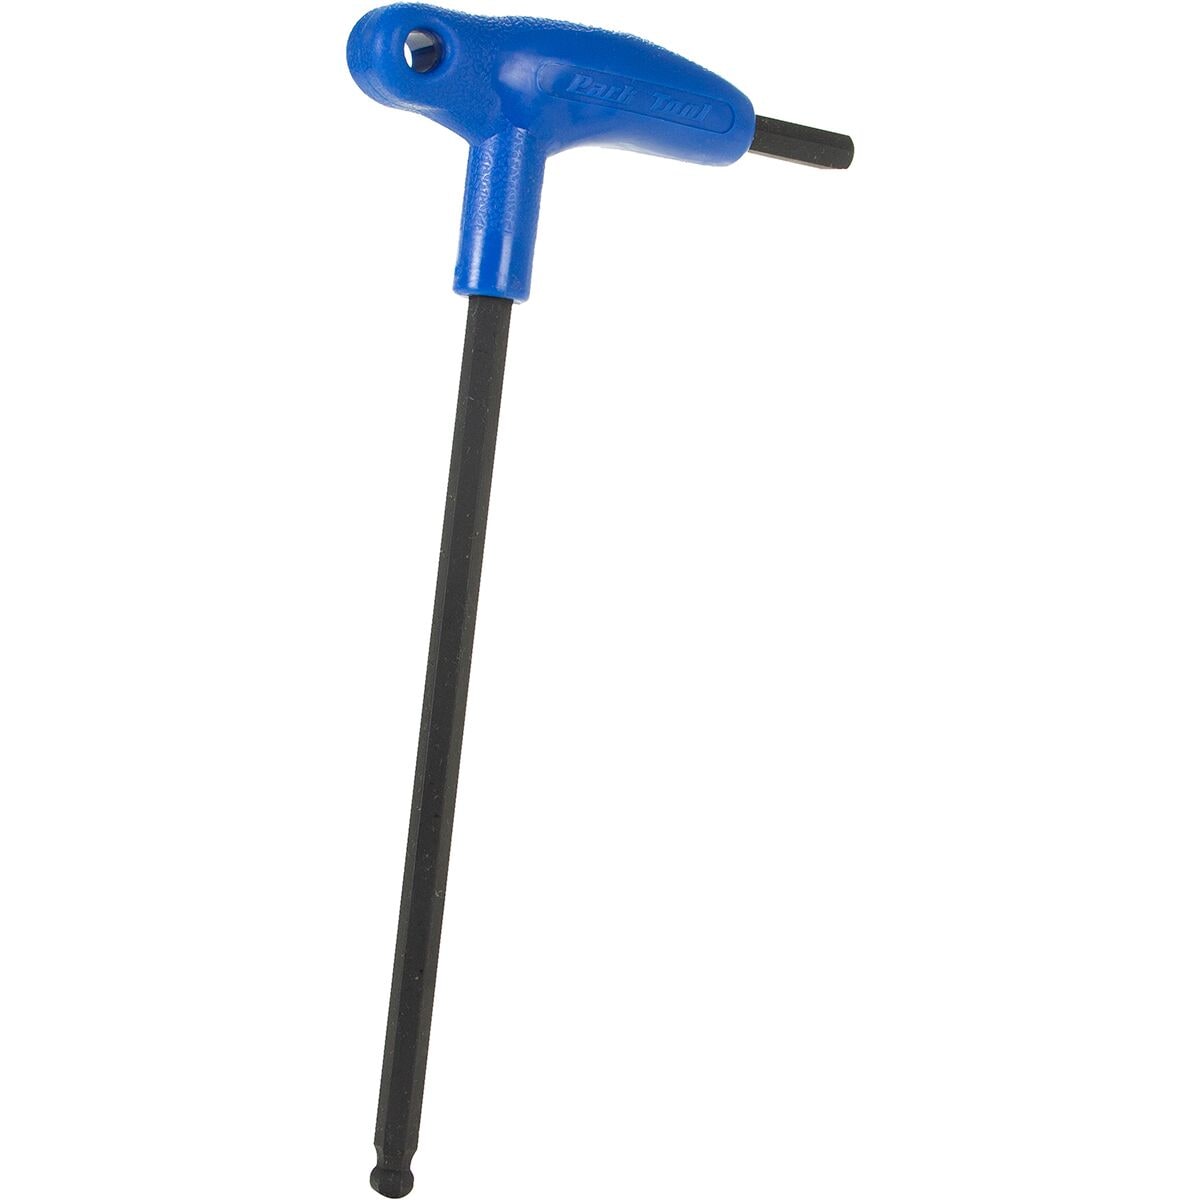 Park Tool Ph-2 P-handled Hex Wrench 2mm for sale online 